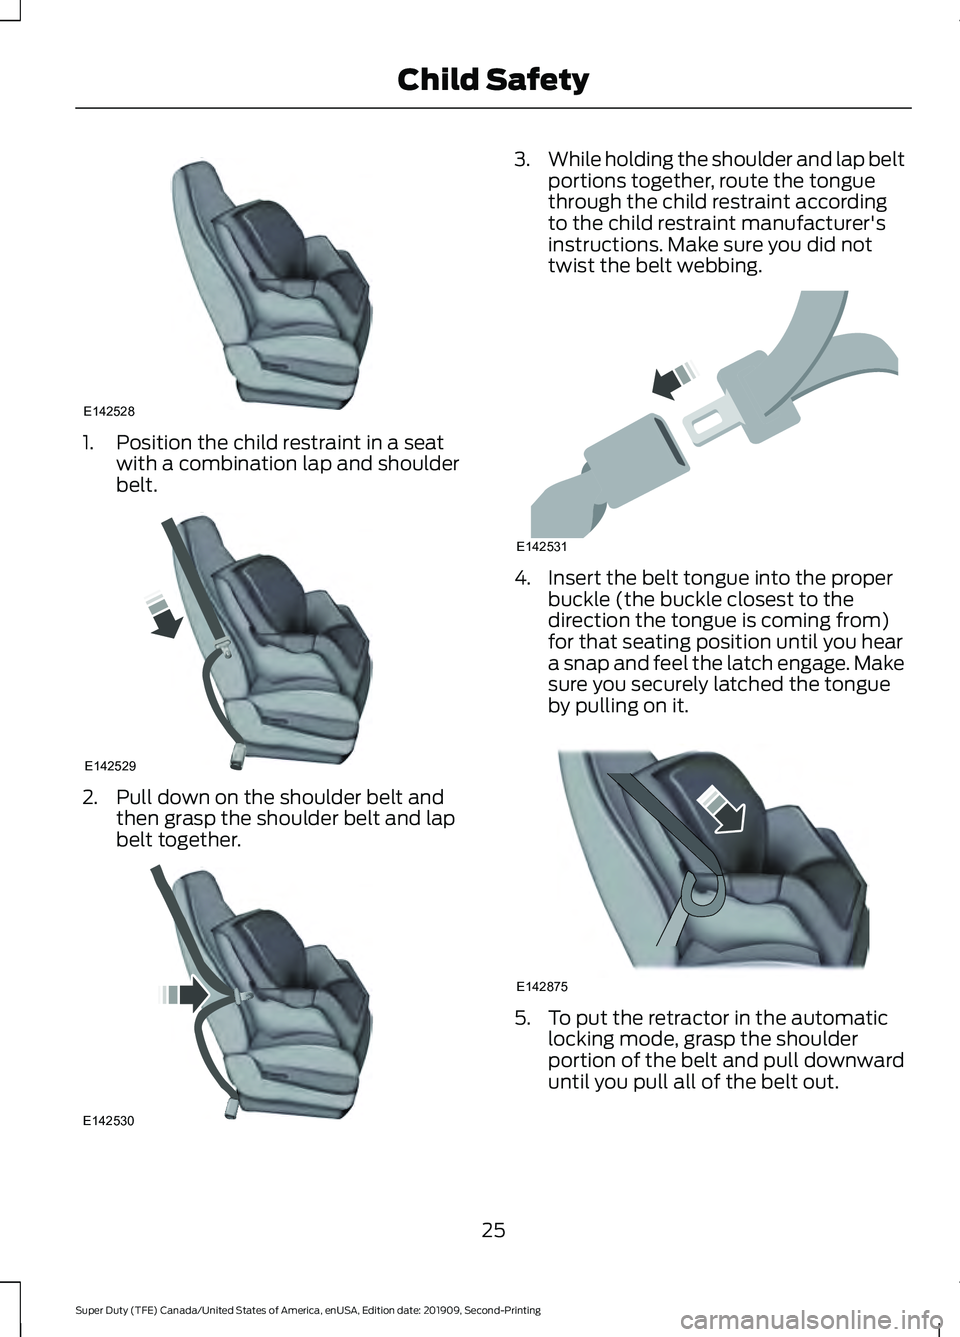 FORD F450 SUPER DUTY 2020  Owners Manual 1. Position the child restraint in a seat
with a combination lap and shoulder
belt. 2. Pull down on the shoulder belt and
then grasp the shoulder belt and lap
belt together. 3.
While holding the shoul